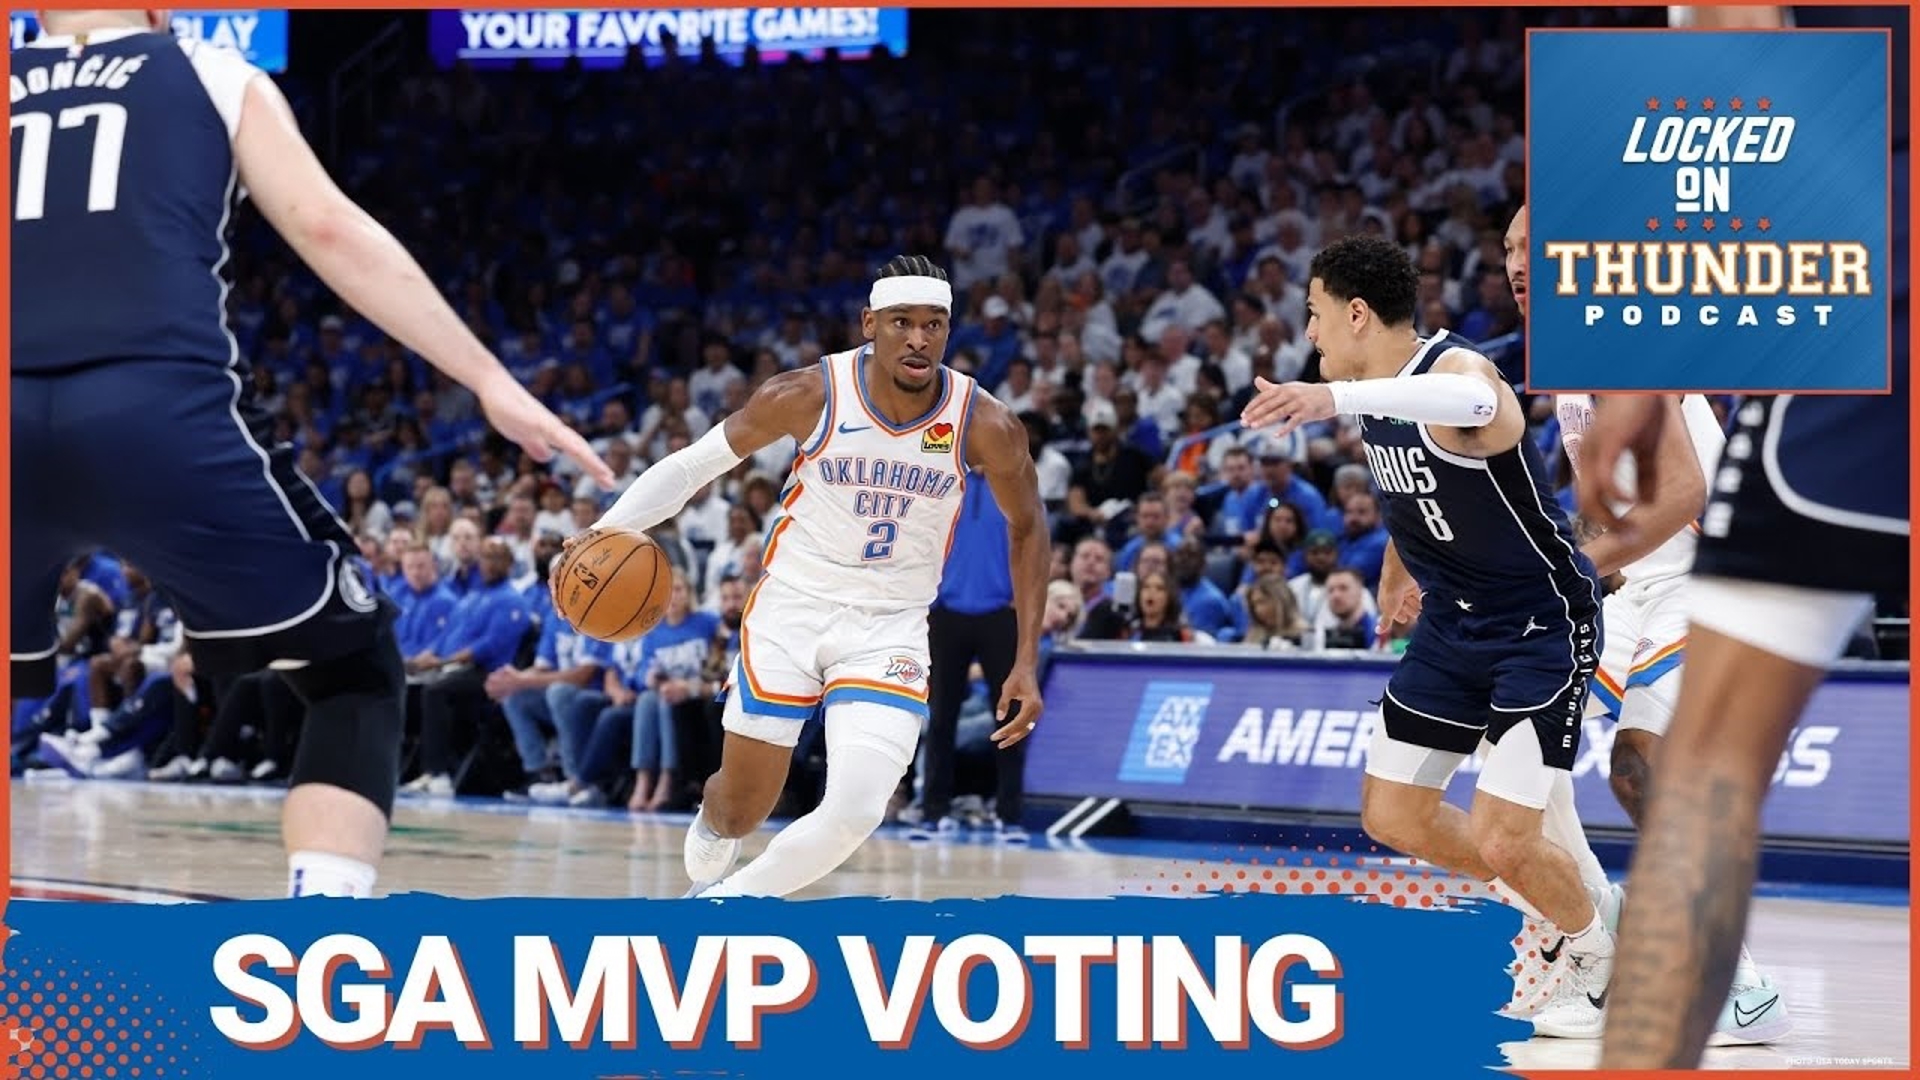 SGA Finishes 2nd In MVP Voting, What Should OKC Thunder Expect in Game